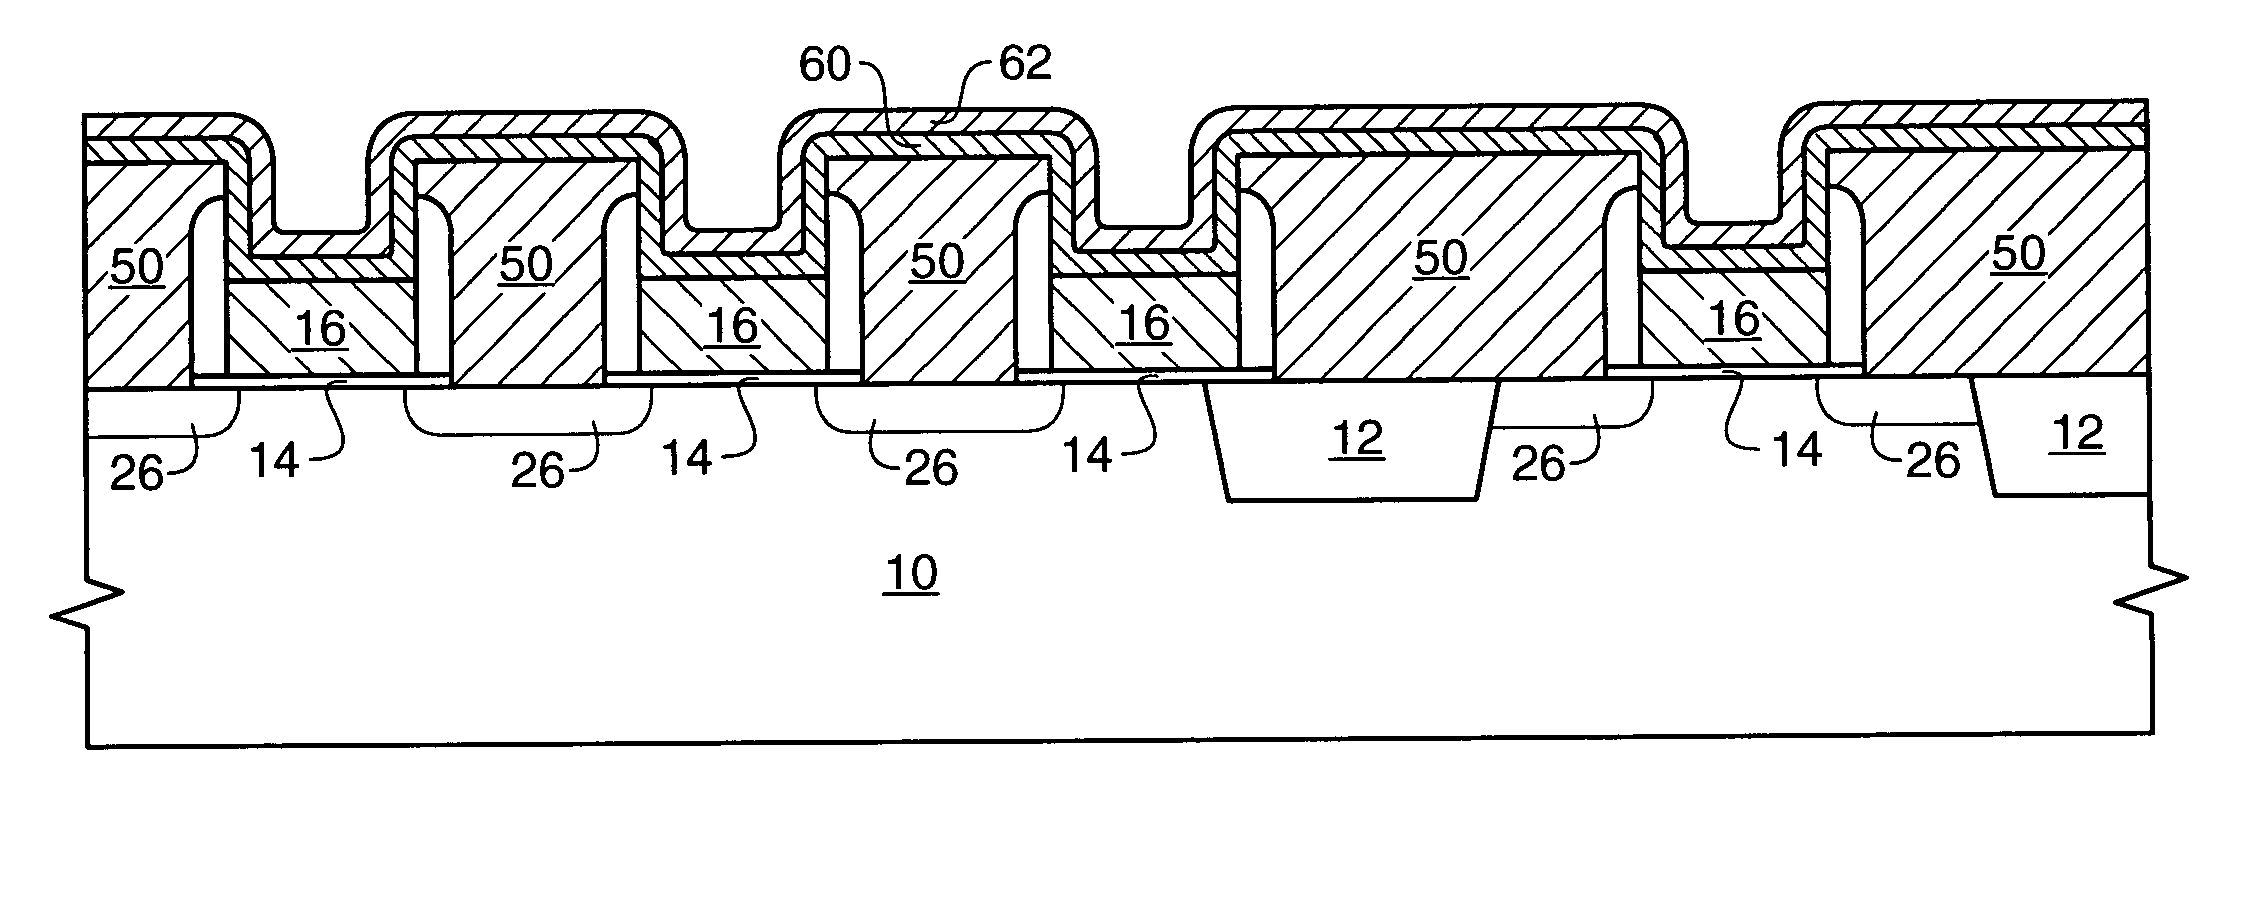 Method and structure for a self-aligned silicided word line and polysilicon plug during the formation of a semiconductor device